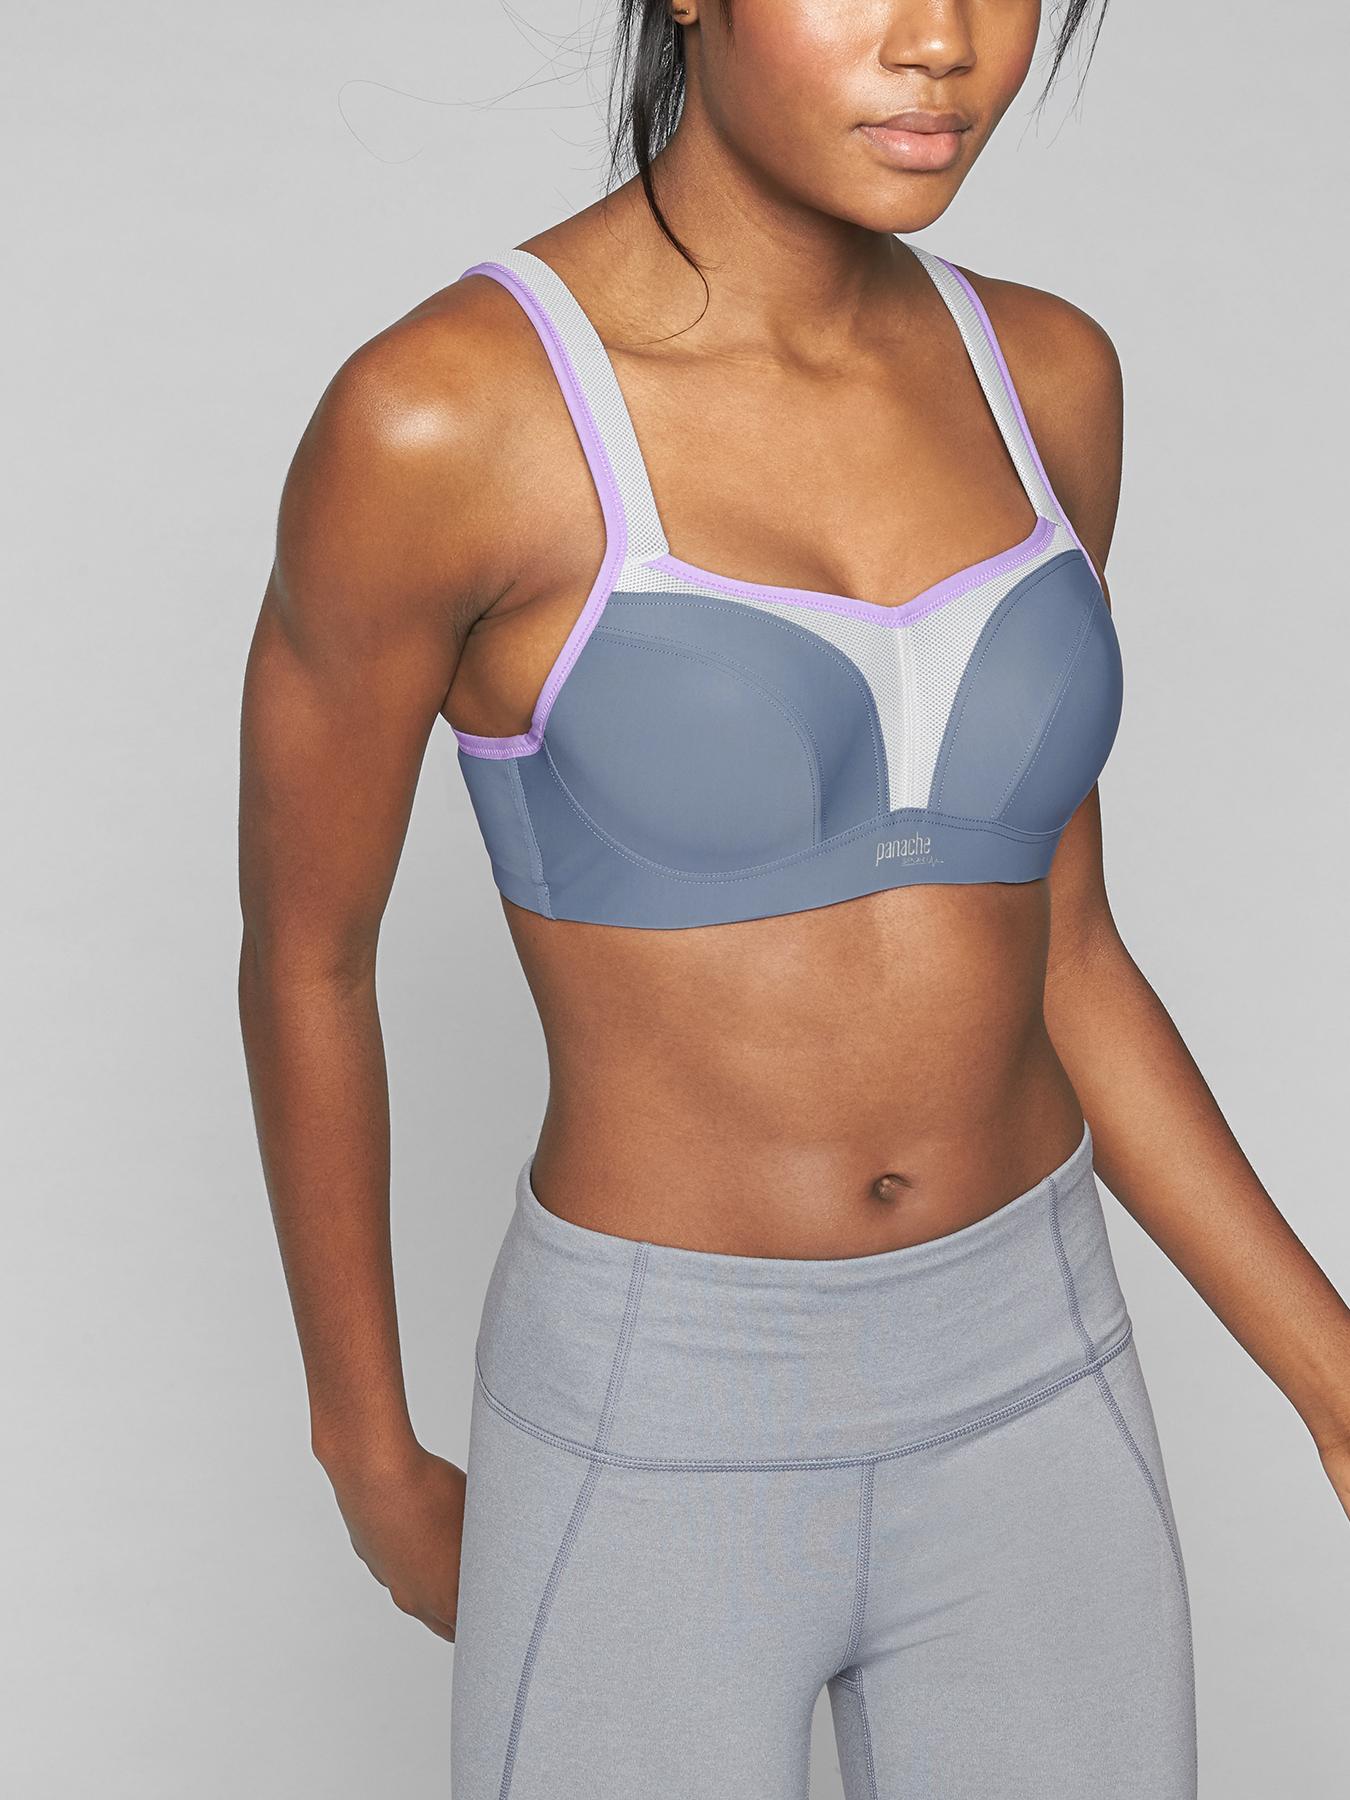 Body Up Intensity High Impact Underwire Sports Bra 38DD, Grey Marle at   Women's Clothing store